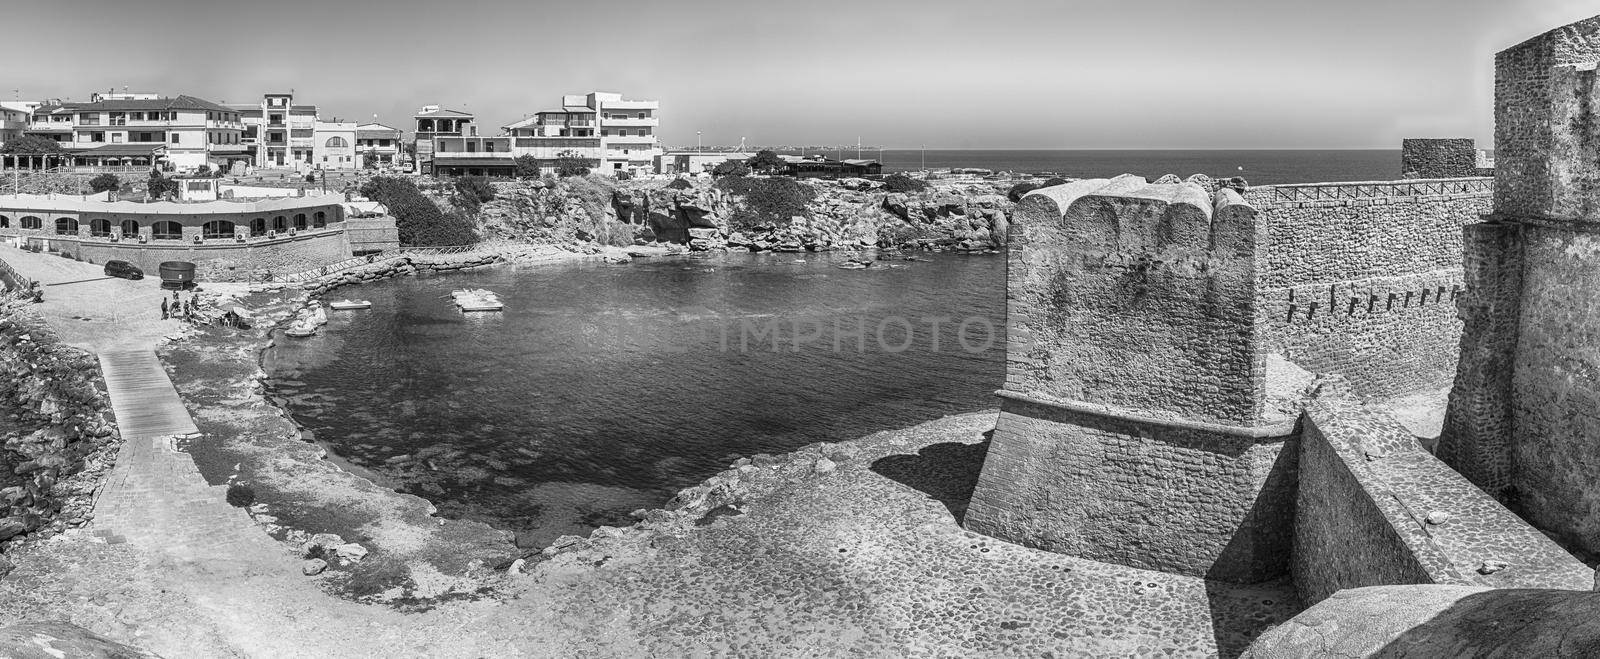 Panoramic view of the scenic Aragonese Castle, aka Le Castella, on the Ionian Sea in the town of Isola di Capo Rizzuto, Italy